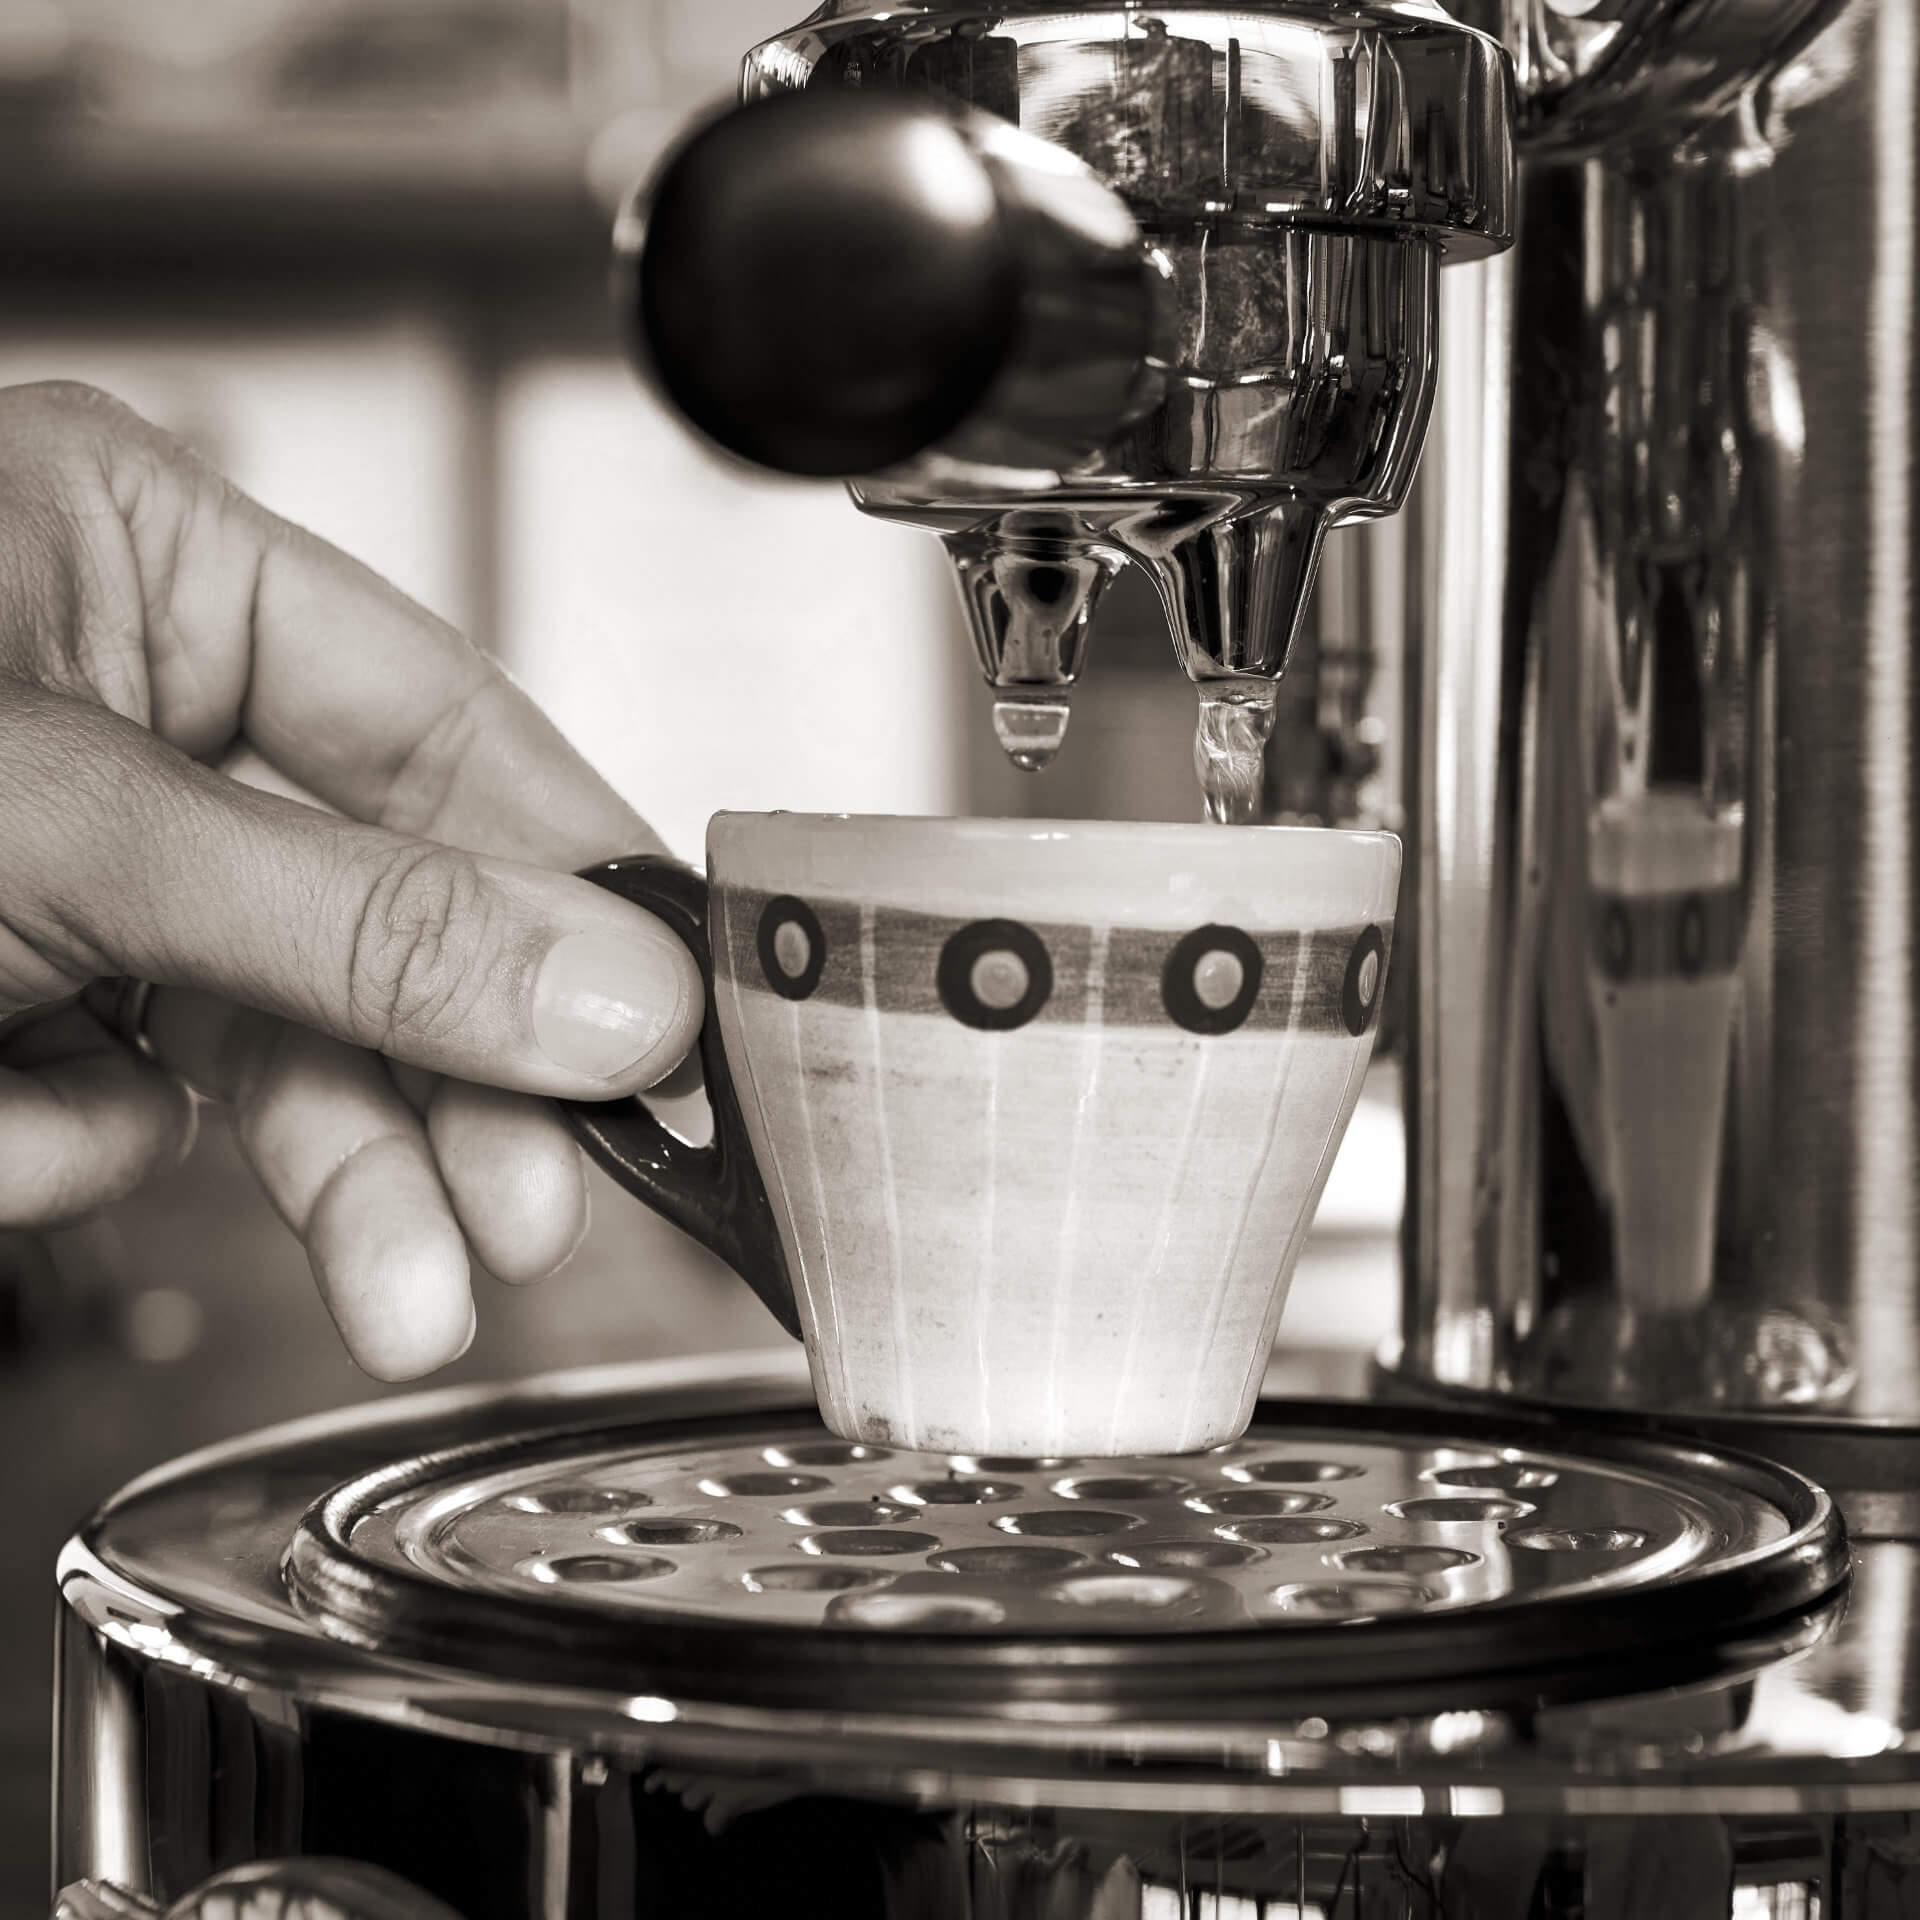 A bespoke espresso machine is brewing the perfect artisanal cup.